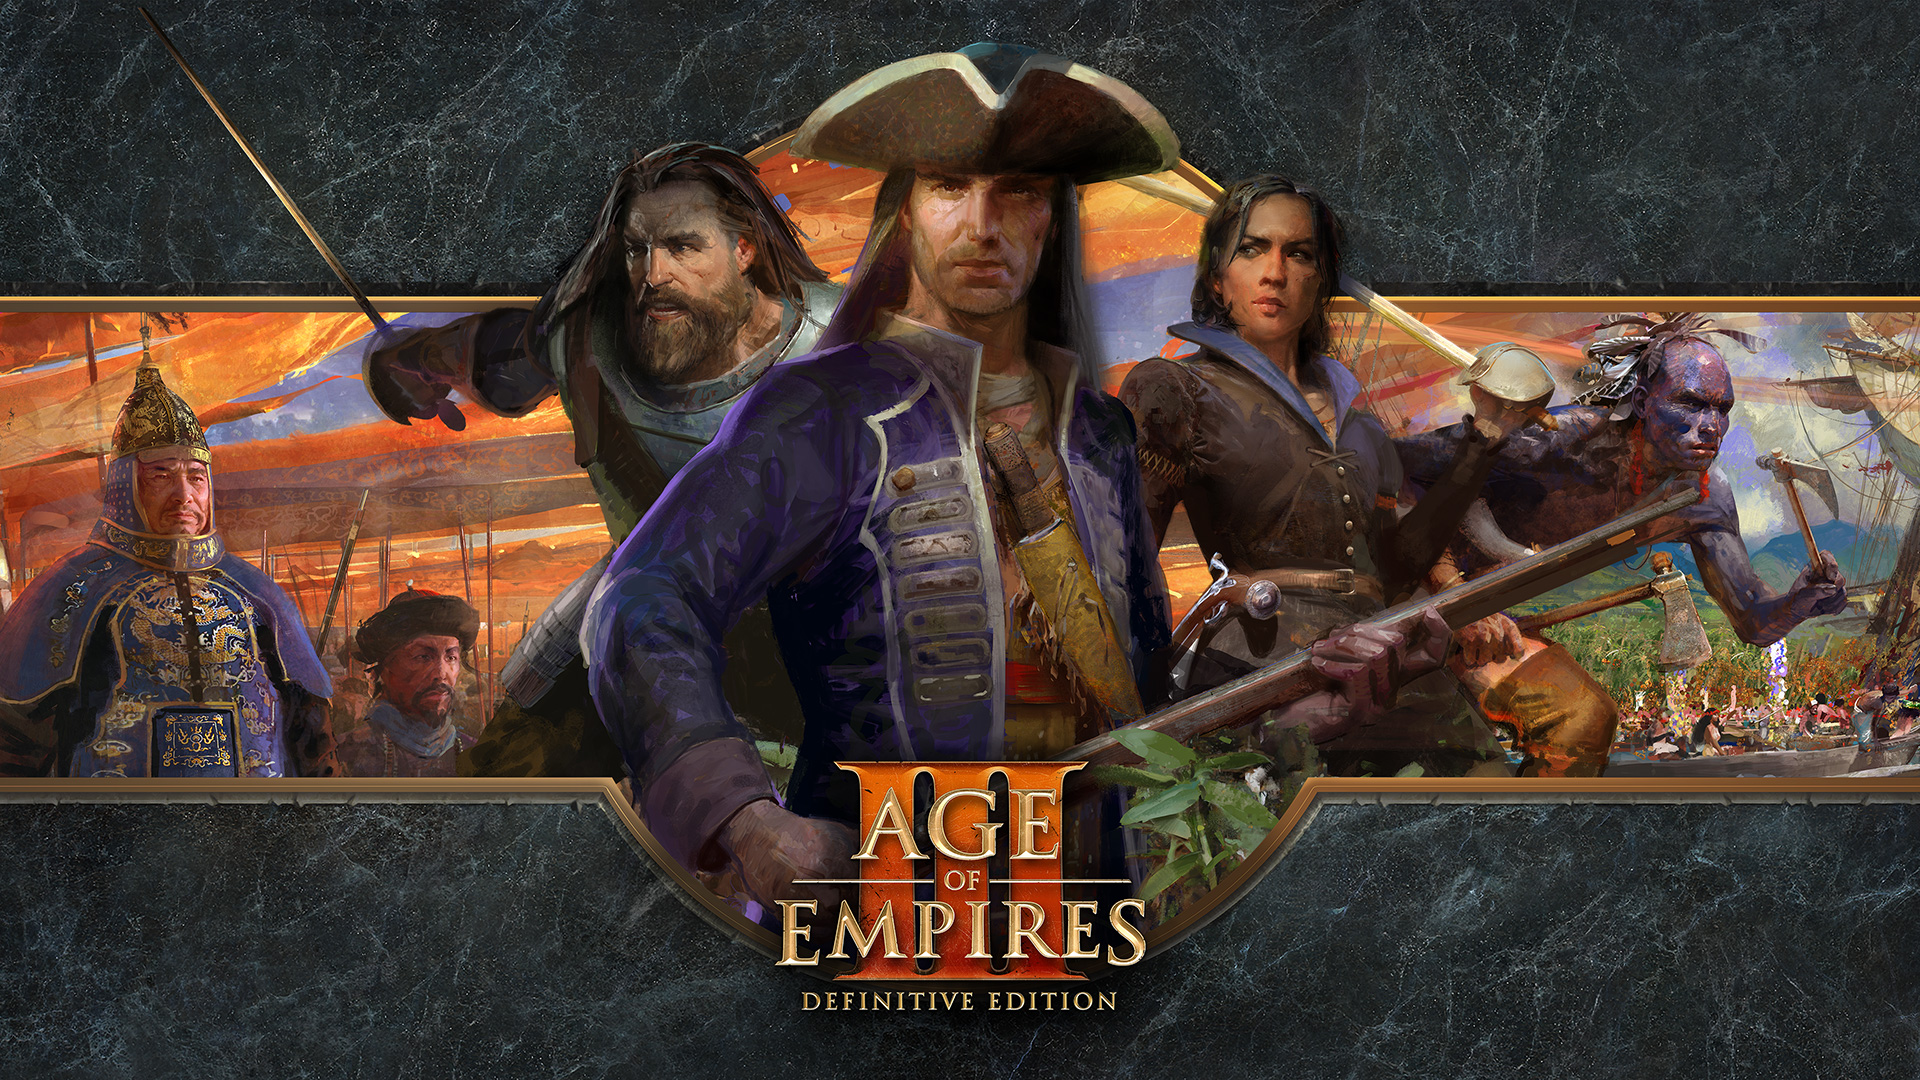 Age of empires 3 in steam фото 51